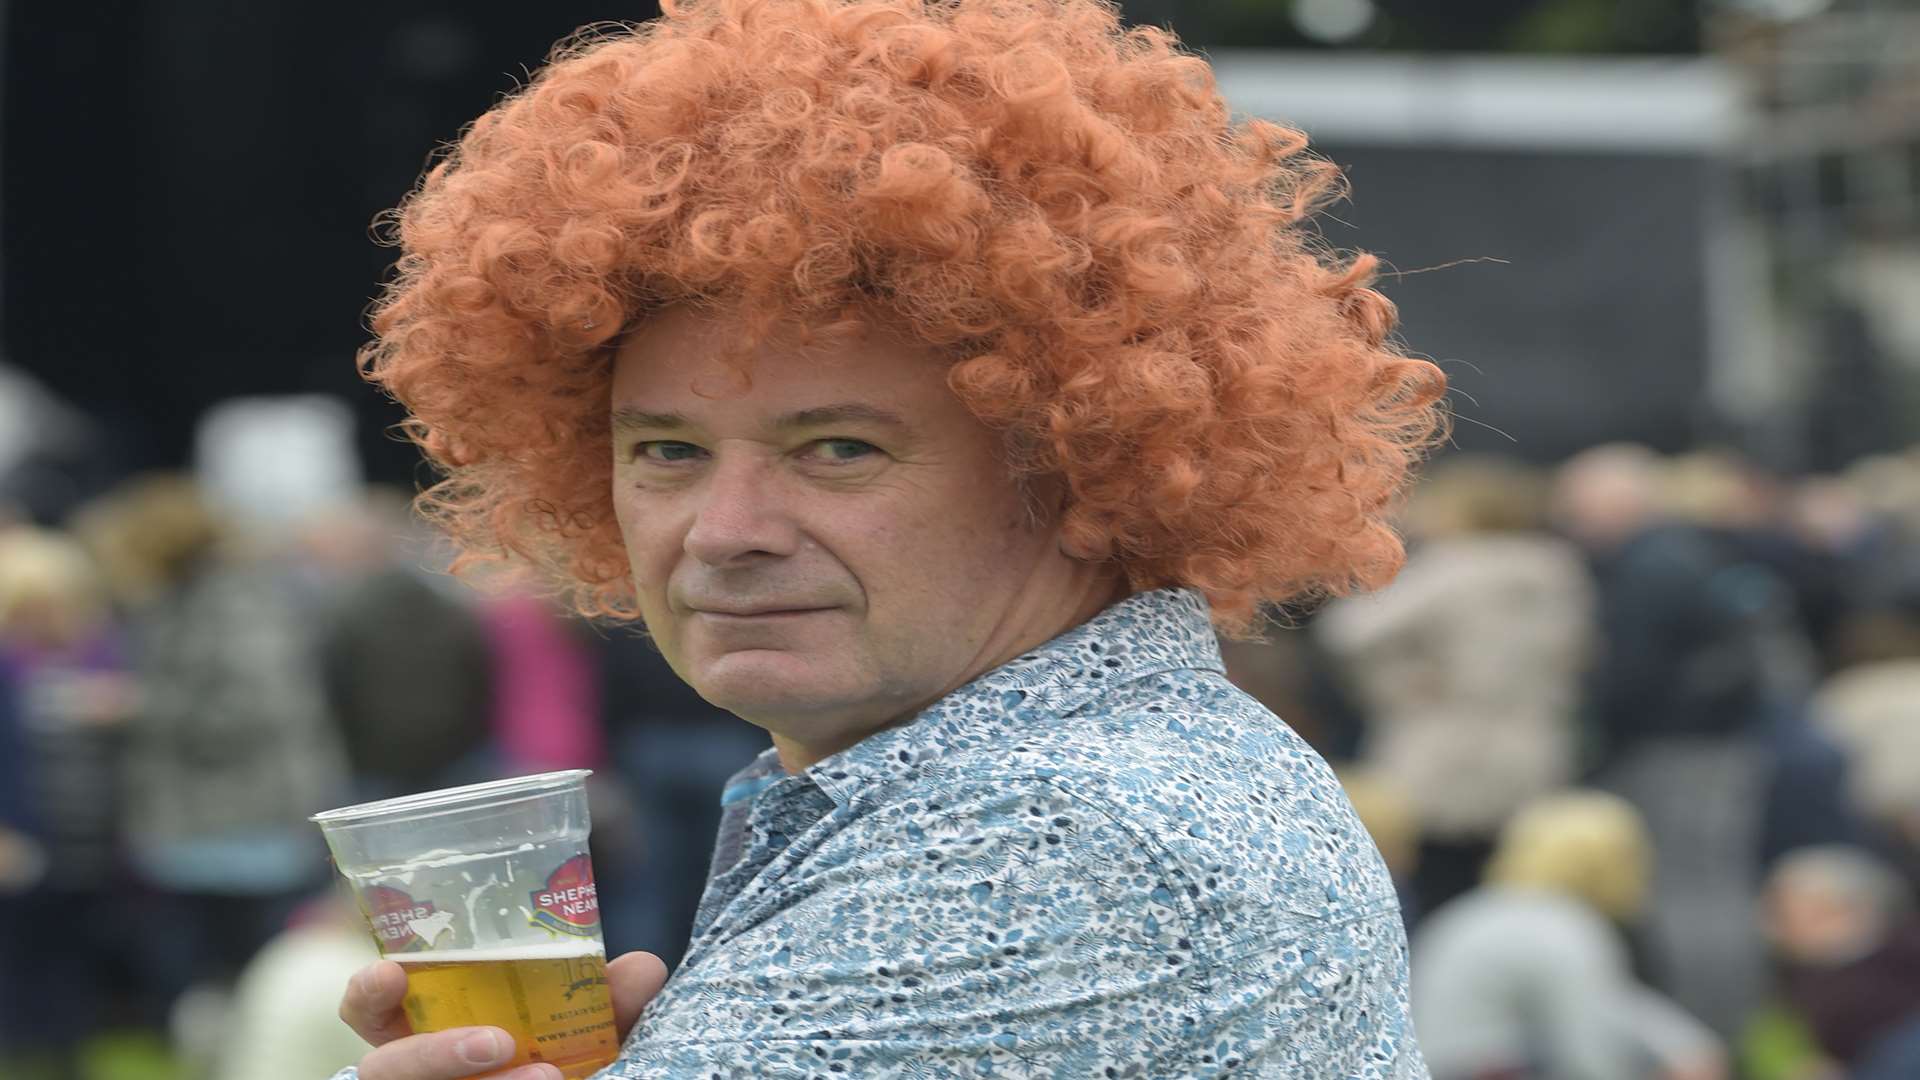 Now that's what you call a real Simply Red fan